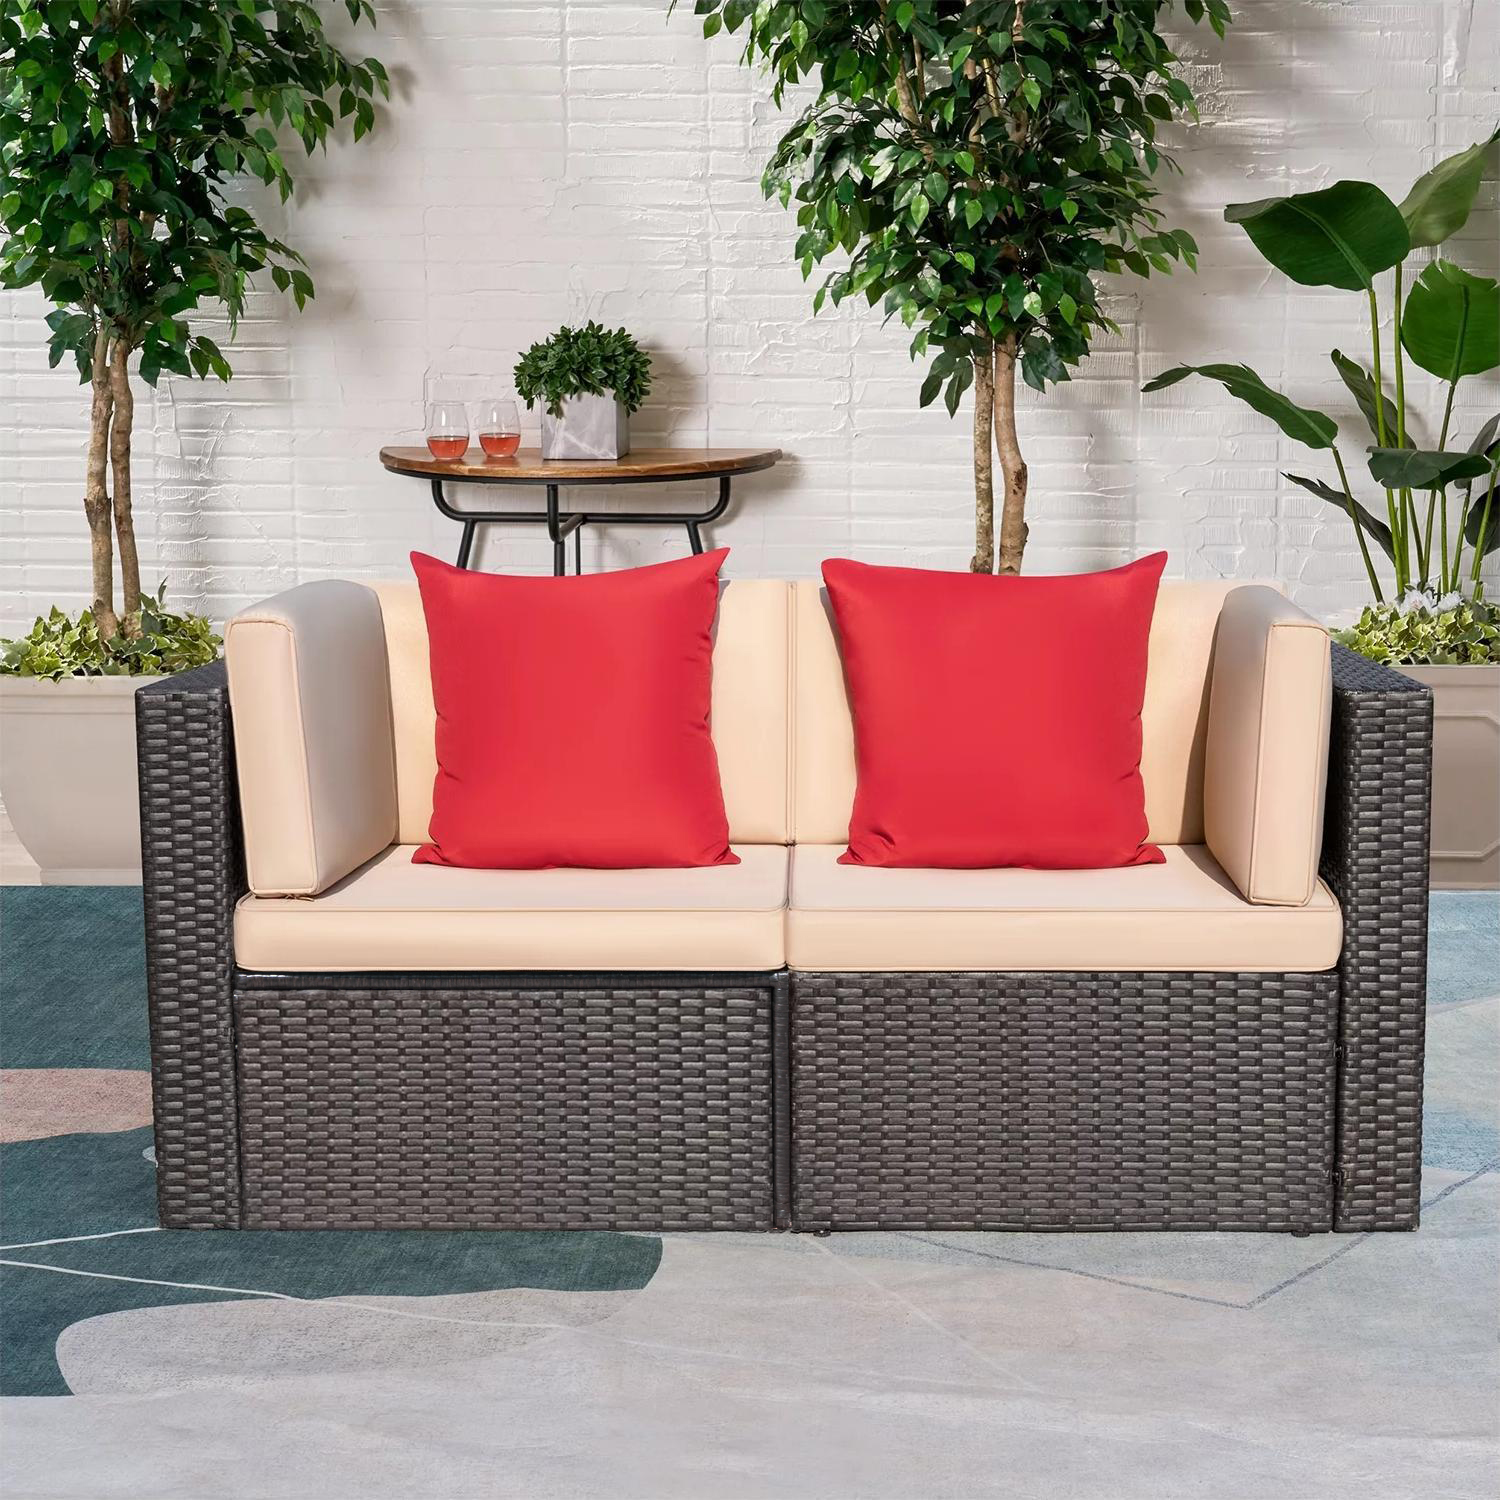 Lacoo 2 Pieces Patio Loveseat Outdoor Sectional Sofa Patio Conversation Set for Small Area, Beige - image 3 of 5